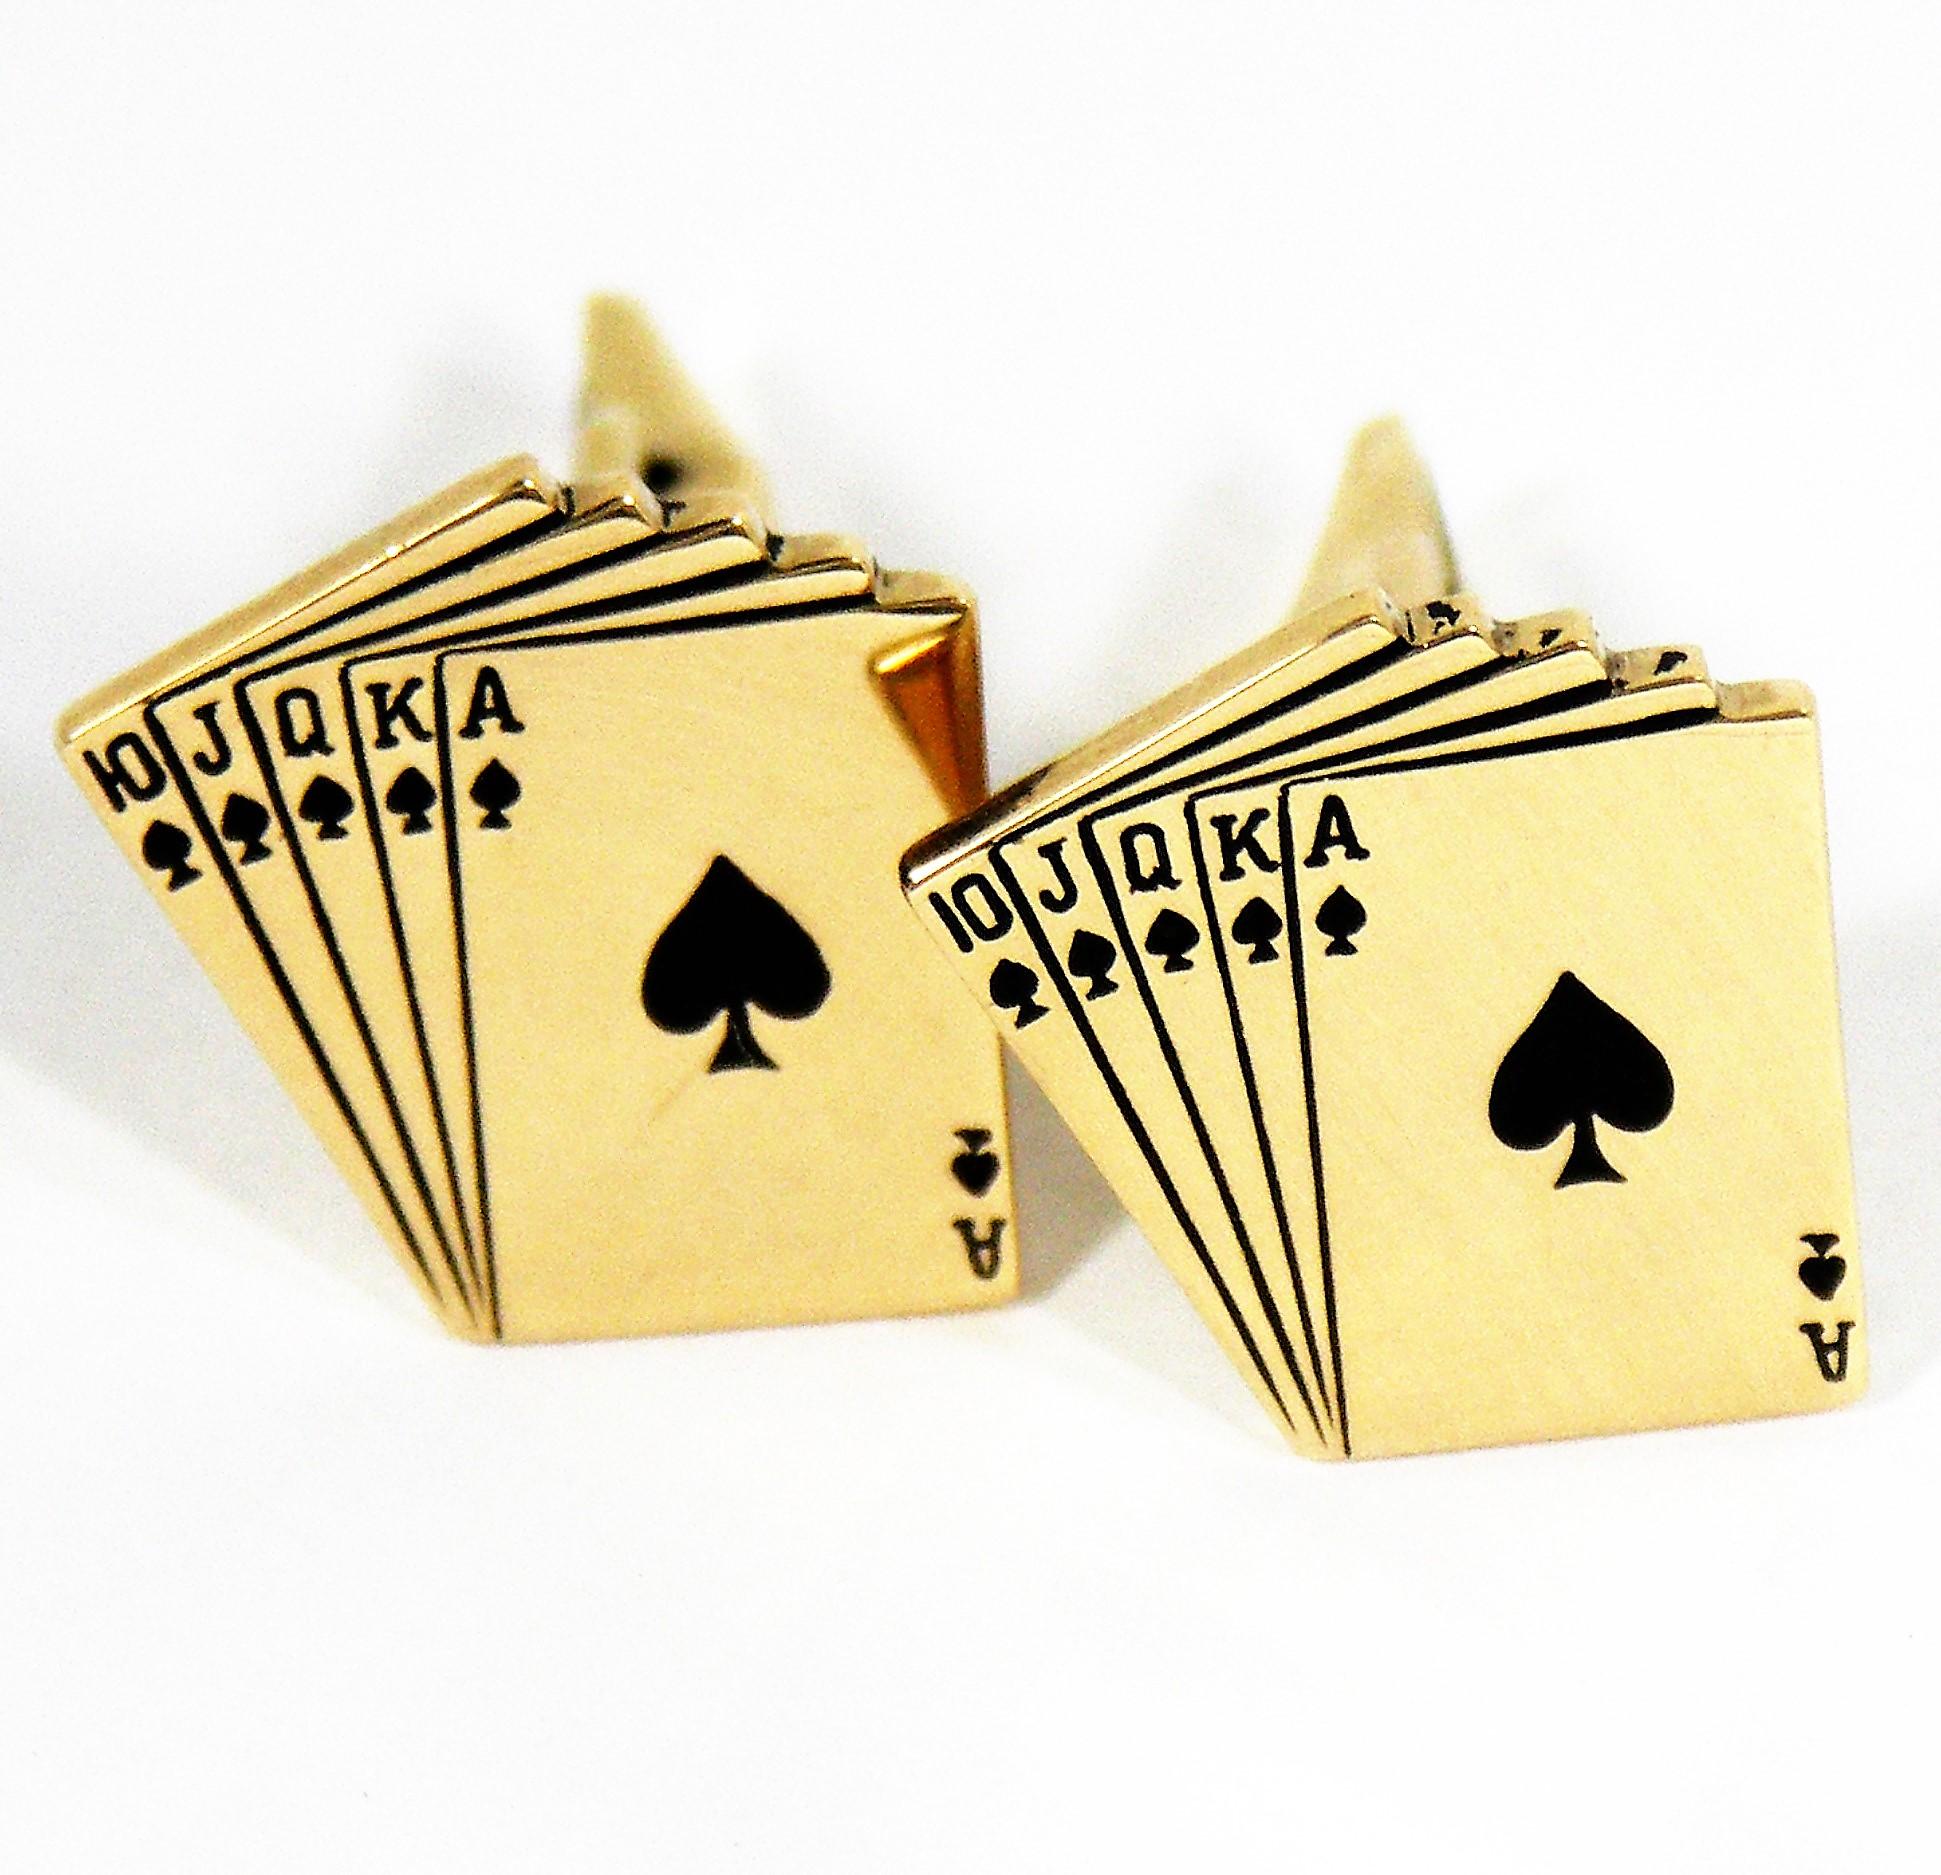 Made of 14K Yellow Gold, and highlighted with black enamel markers, these fun cufflinks are ideal for your favorite poker player. The fold down backs make them easy to put on and to take off. Measuring 3/4 inch x 11/16 inch.  Gross weight 16.6 grams.